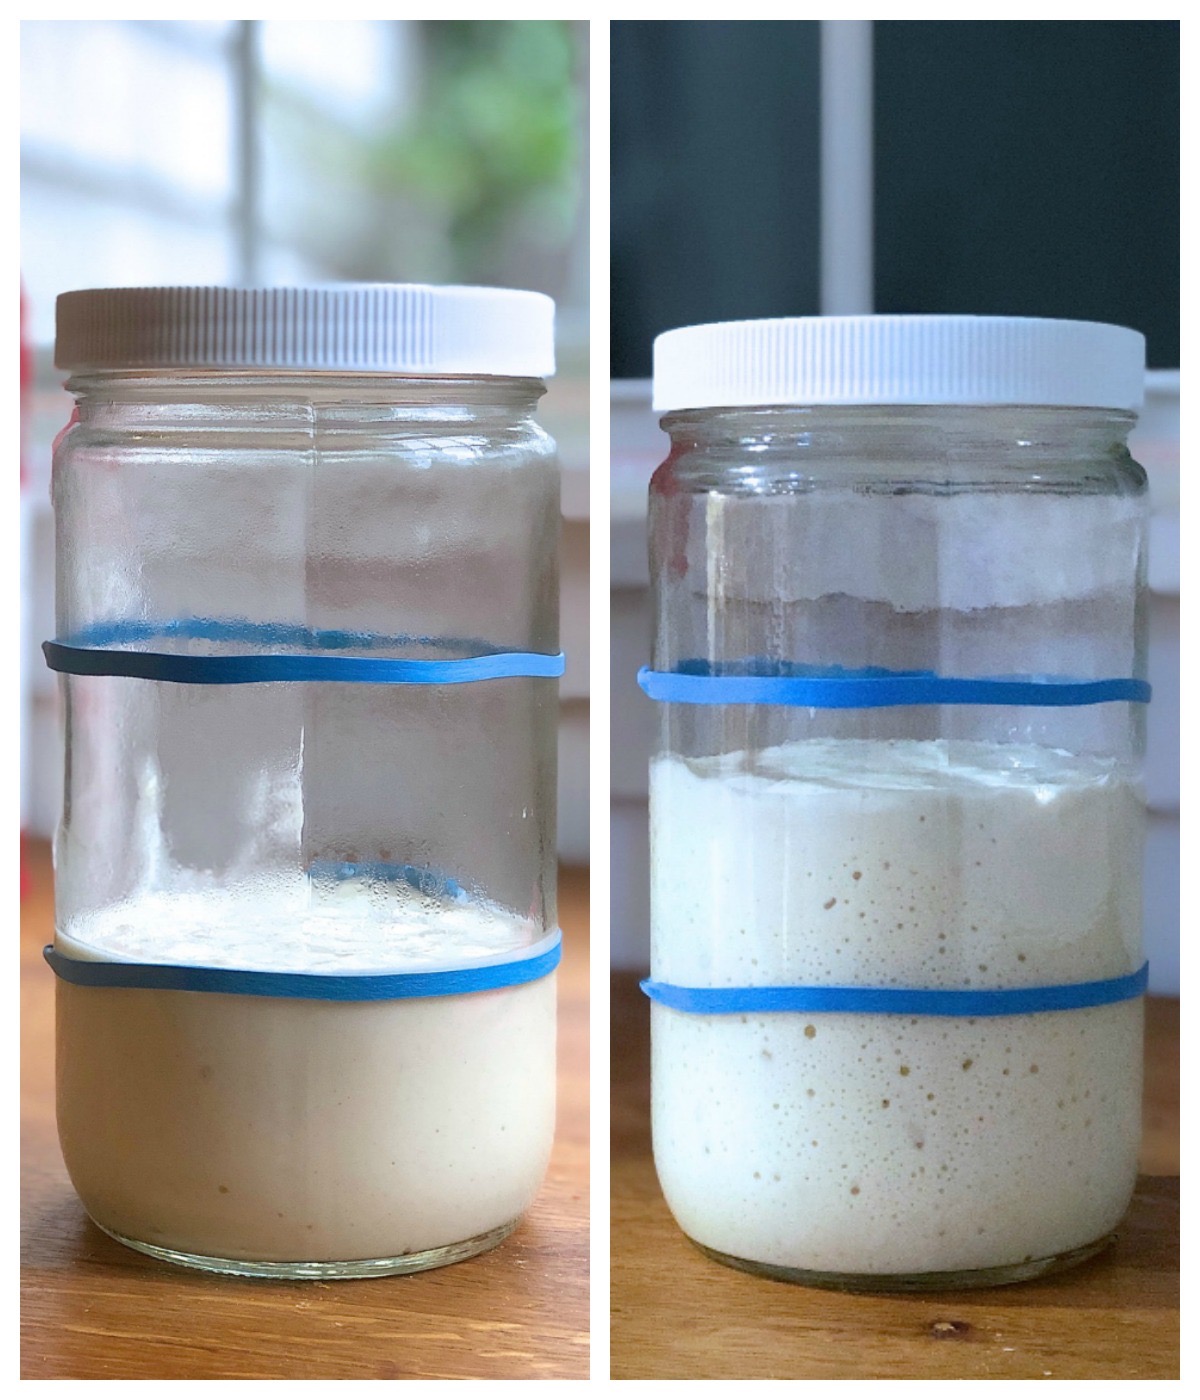 Sourdough starter, two pictures: first, ready to feed. Second, 8 hours after feeding.